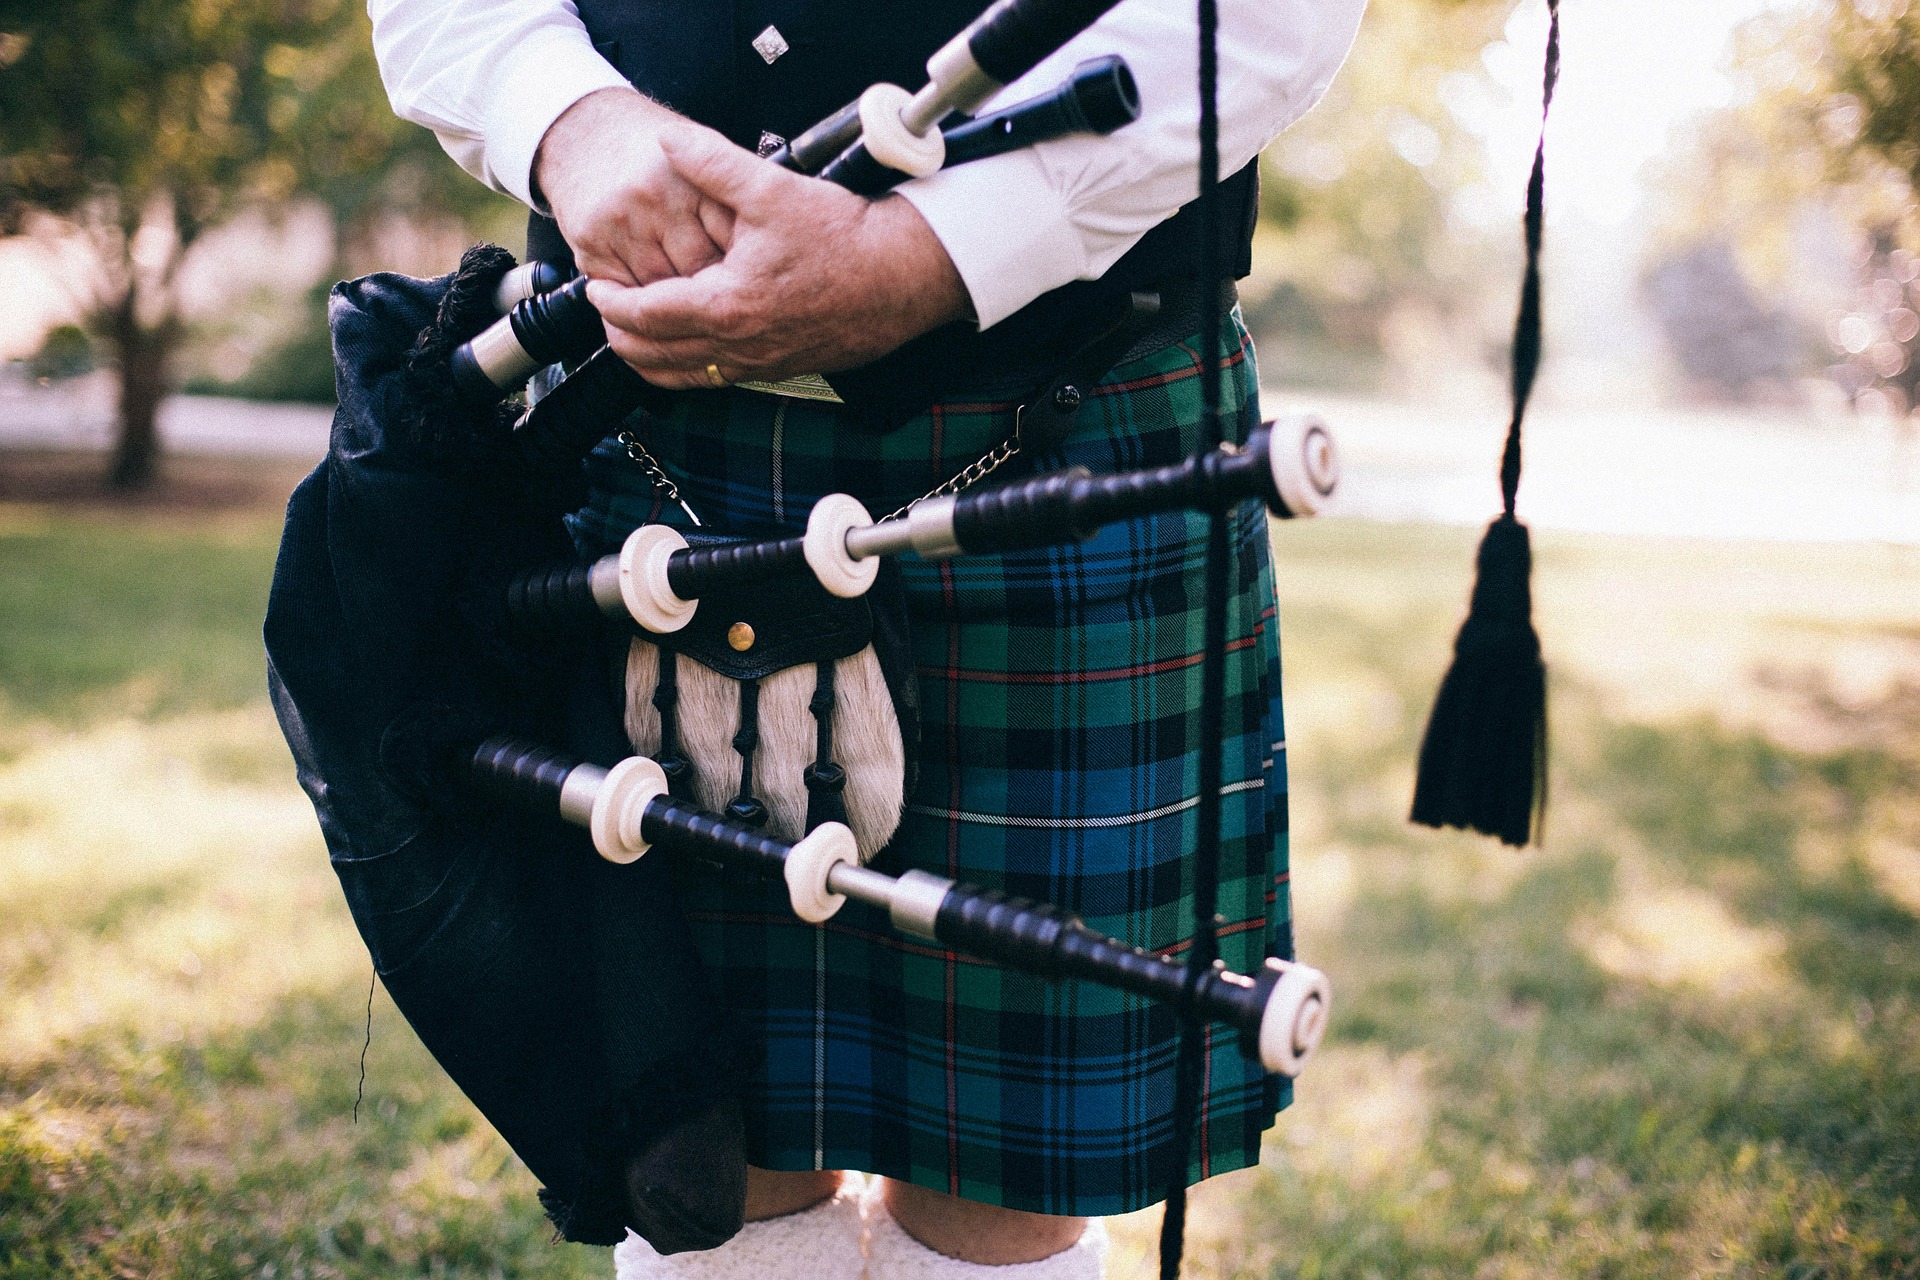 Highland Dress | Discover Scottish Heritage & Culture at UWS | University of the West of Scotland